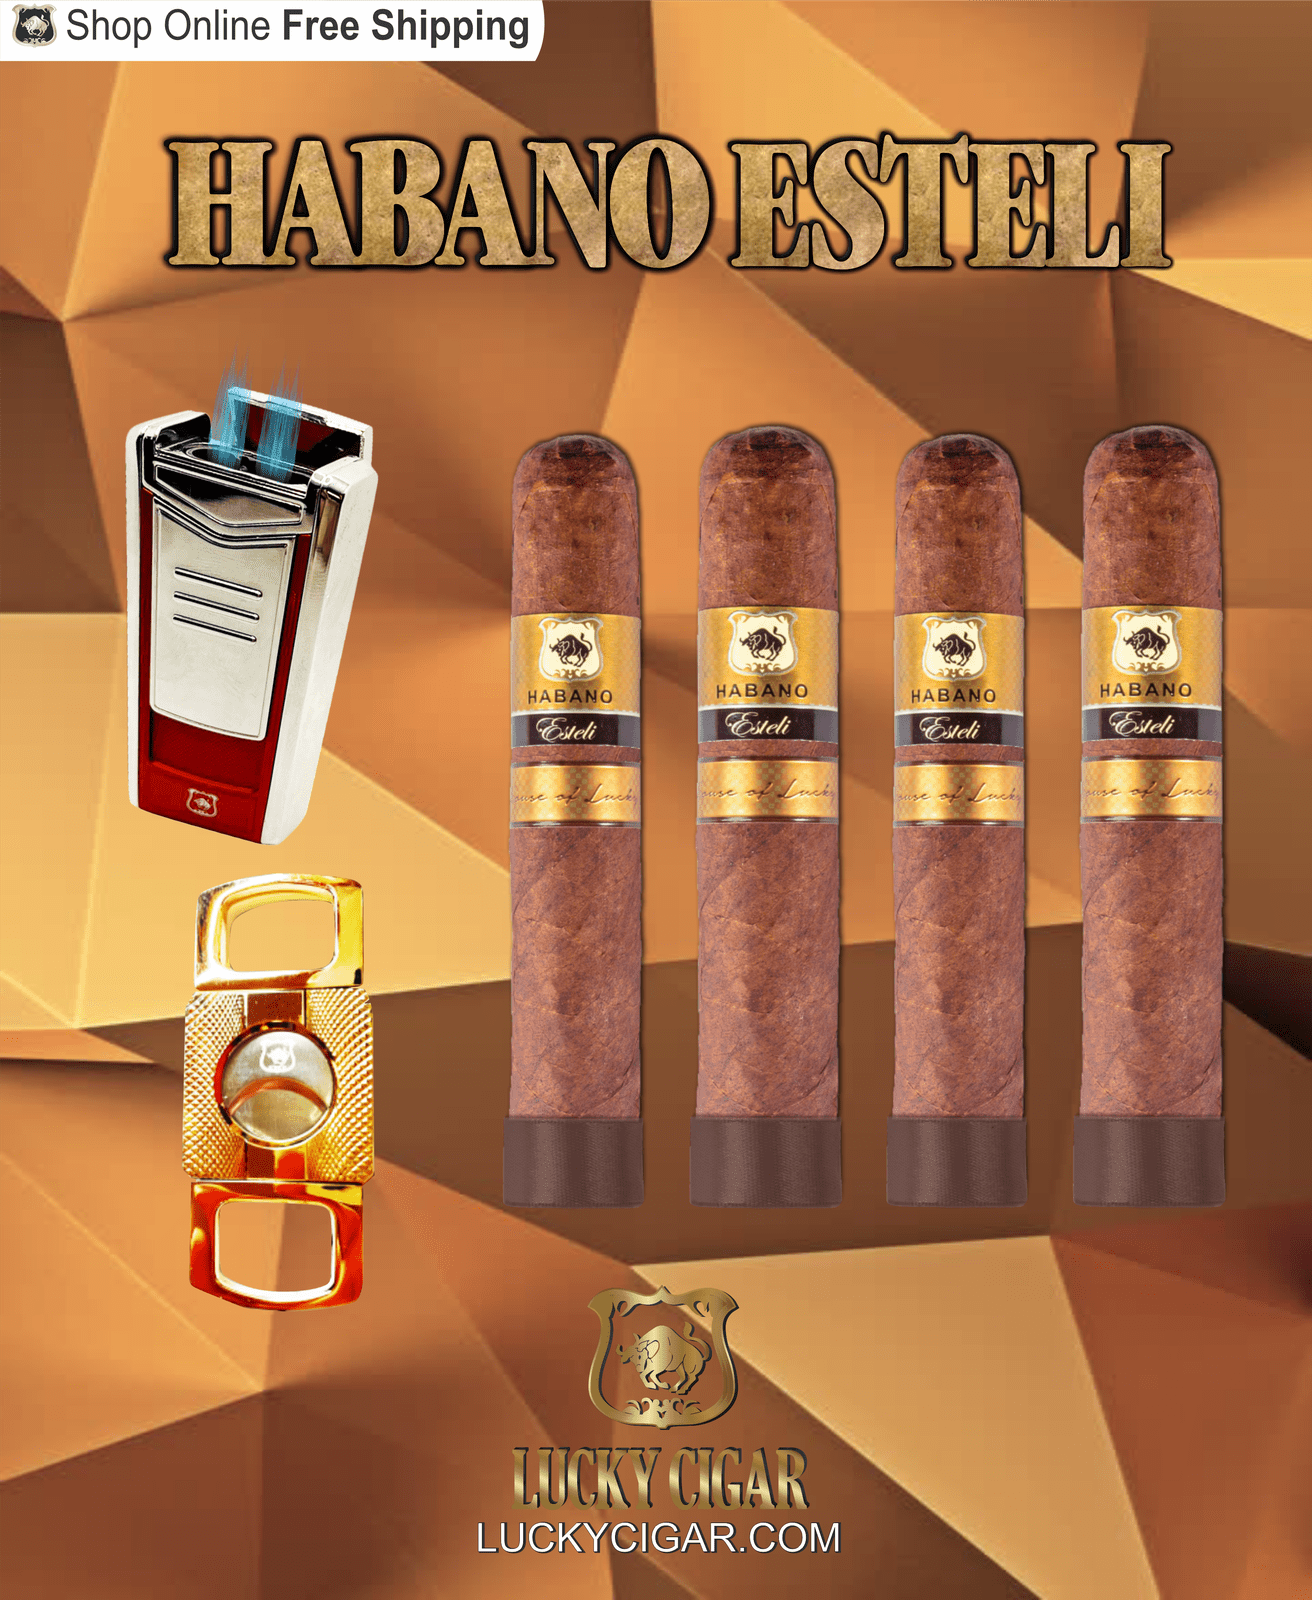 Habano Cigars: Habano Esteli by Lucky Cigar: Set of 4 Cigars, 4 Gordo with Cutter, Lighter